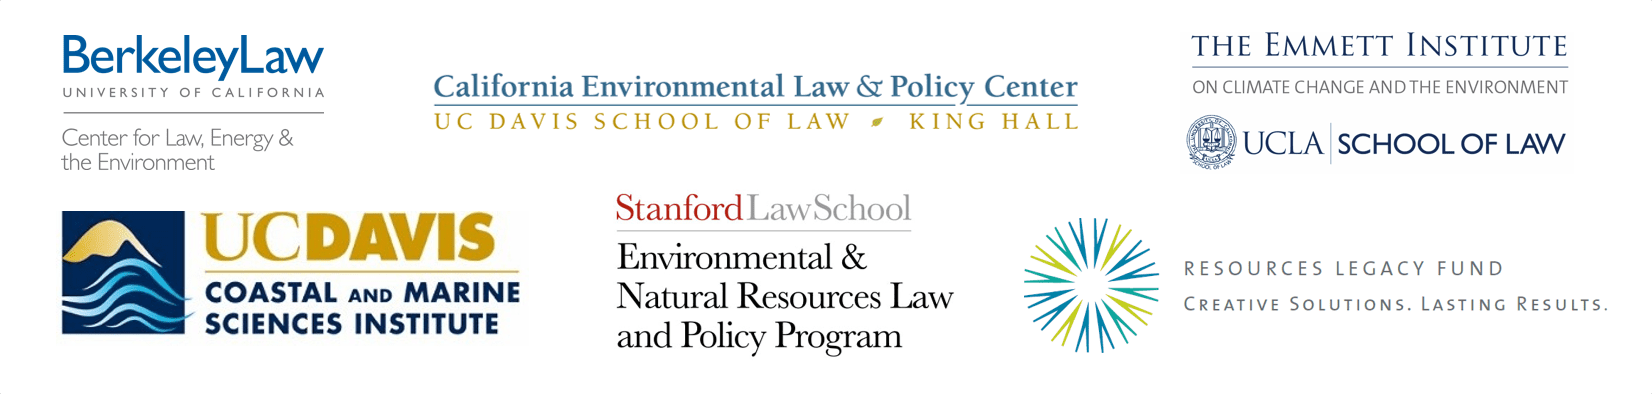 List of logos: Berkeley Law Center for Law, Energy & the Environment. California Environmental Law & Policy Center, UC Davis school of law - King Hall. The Emmett institute on climate change and the environment, UCLA school of law. UC David Coastal and marine sciences institute. Stanford Law School, environmental & natural resources law and policy program. Resources legacy fund, creating solutions, Lasting results.